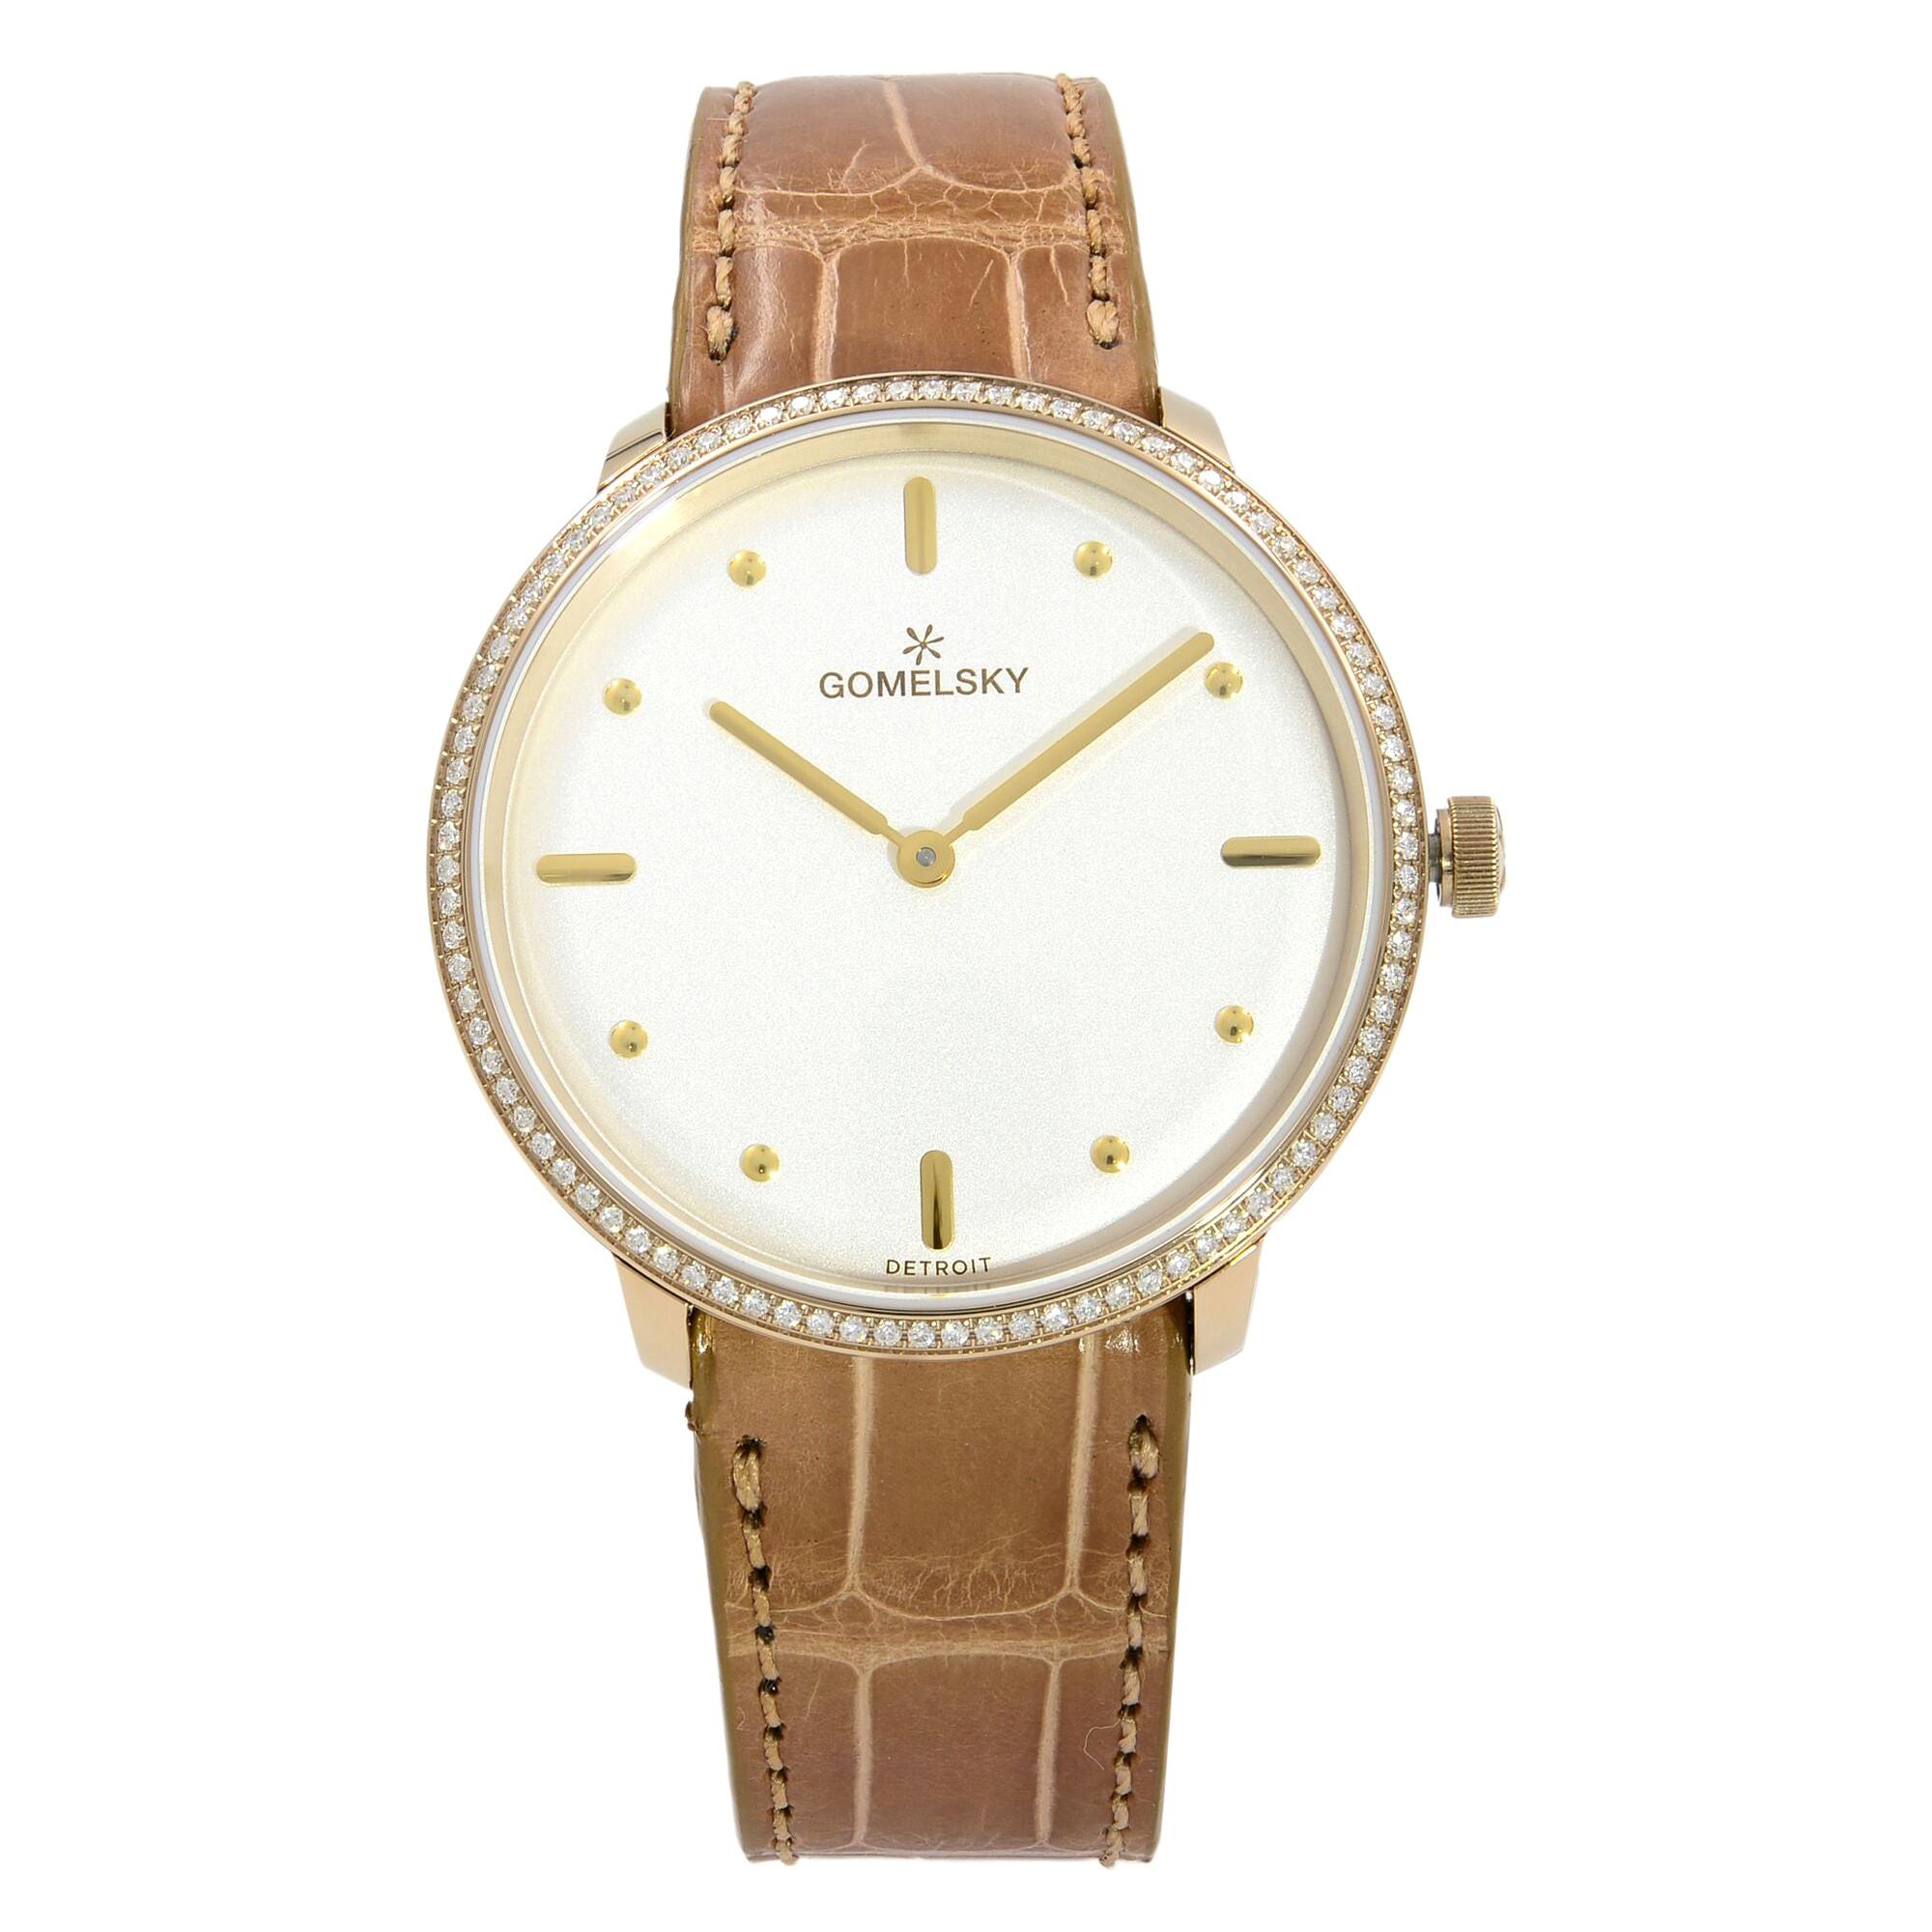 Gomelsky Audry Steel Gold-Plated Diamond White Dial Ladies Watch G0120112280